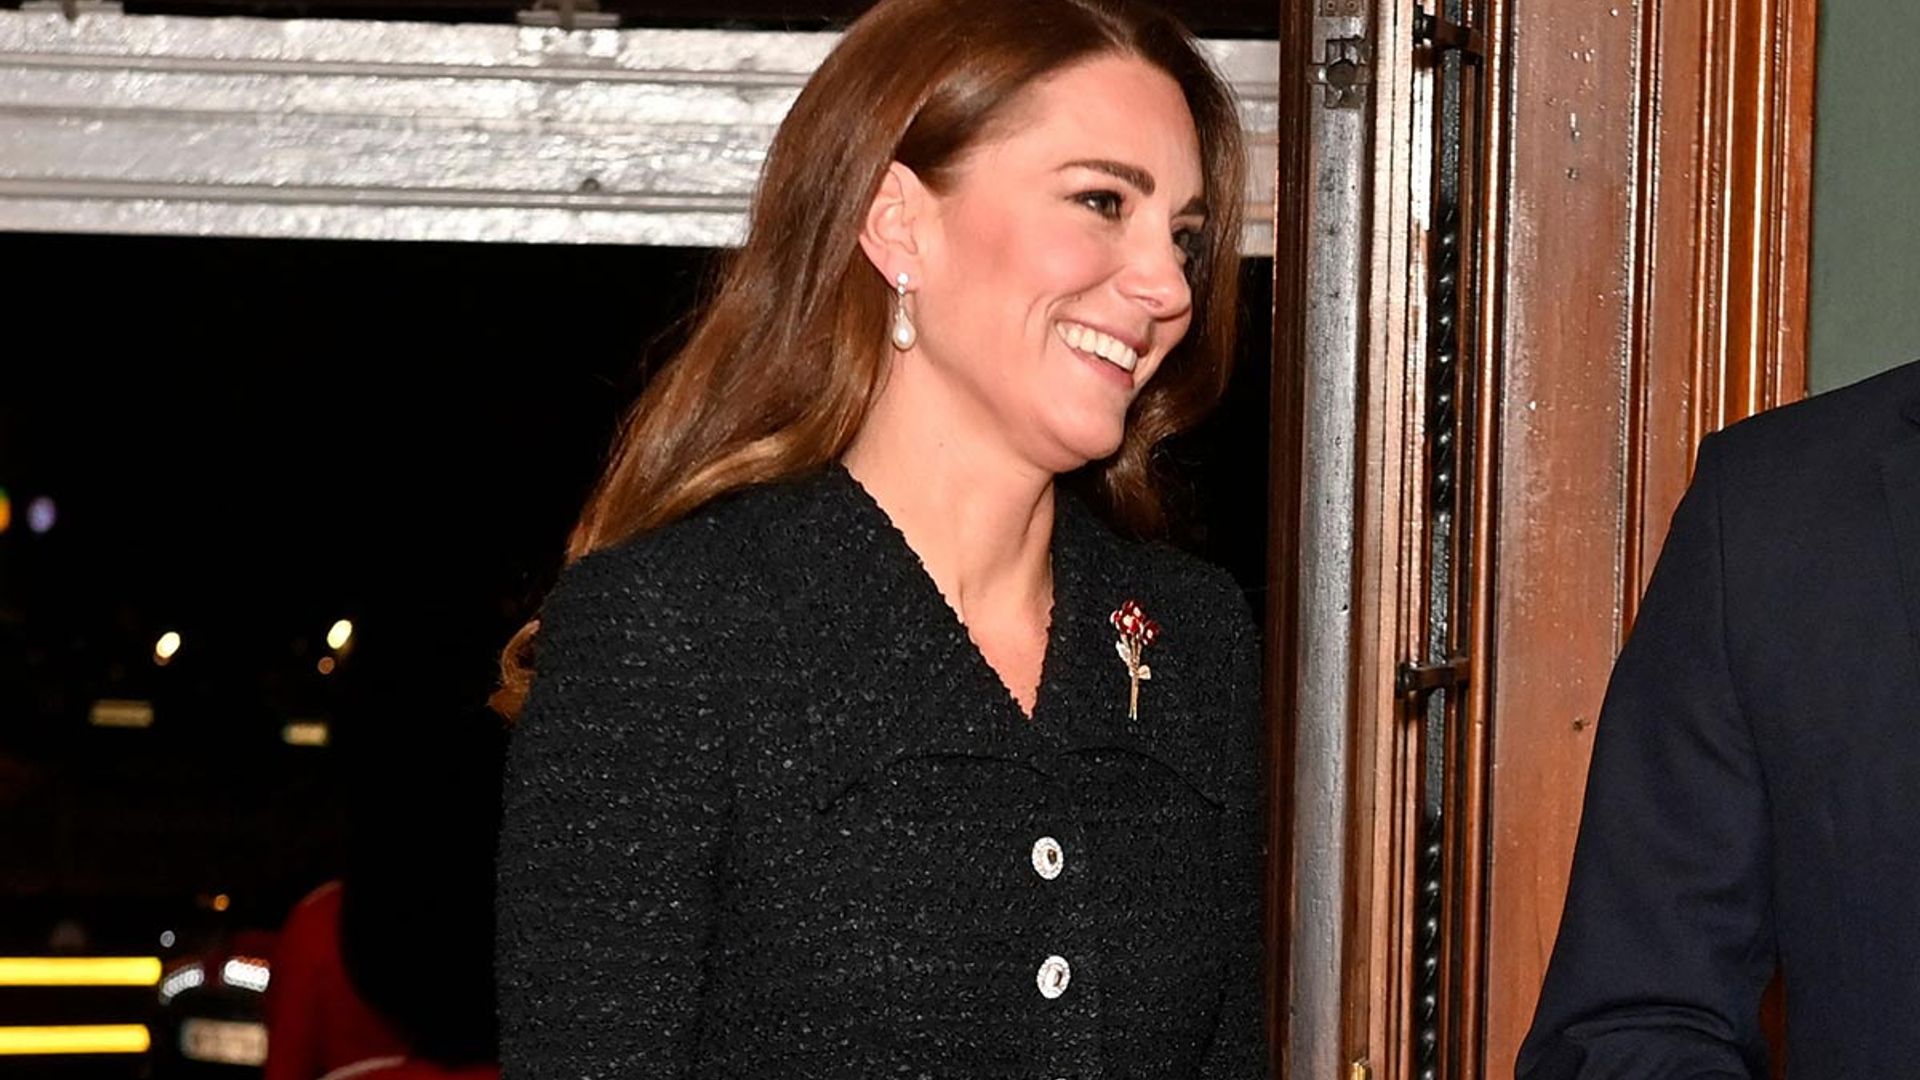 Kate Middleton stuns in Eponine London at the Festival of Remembrance 2021